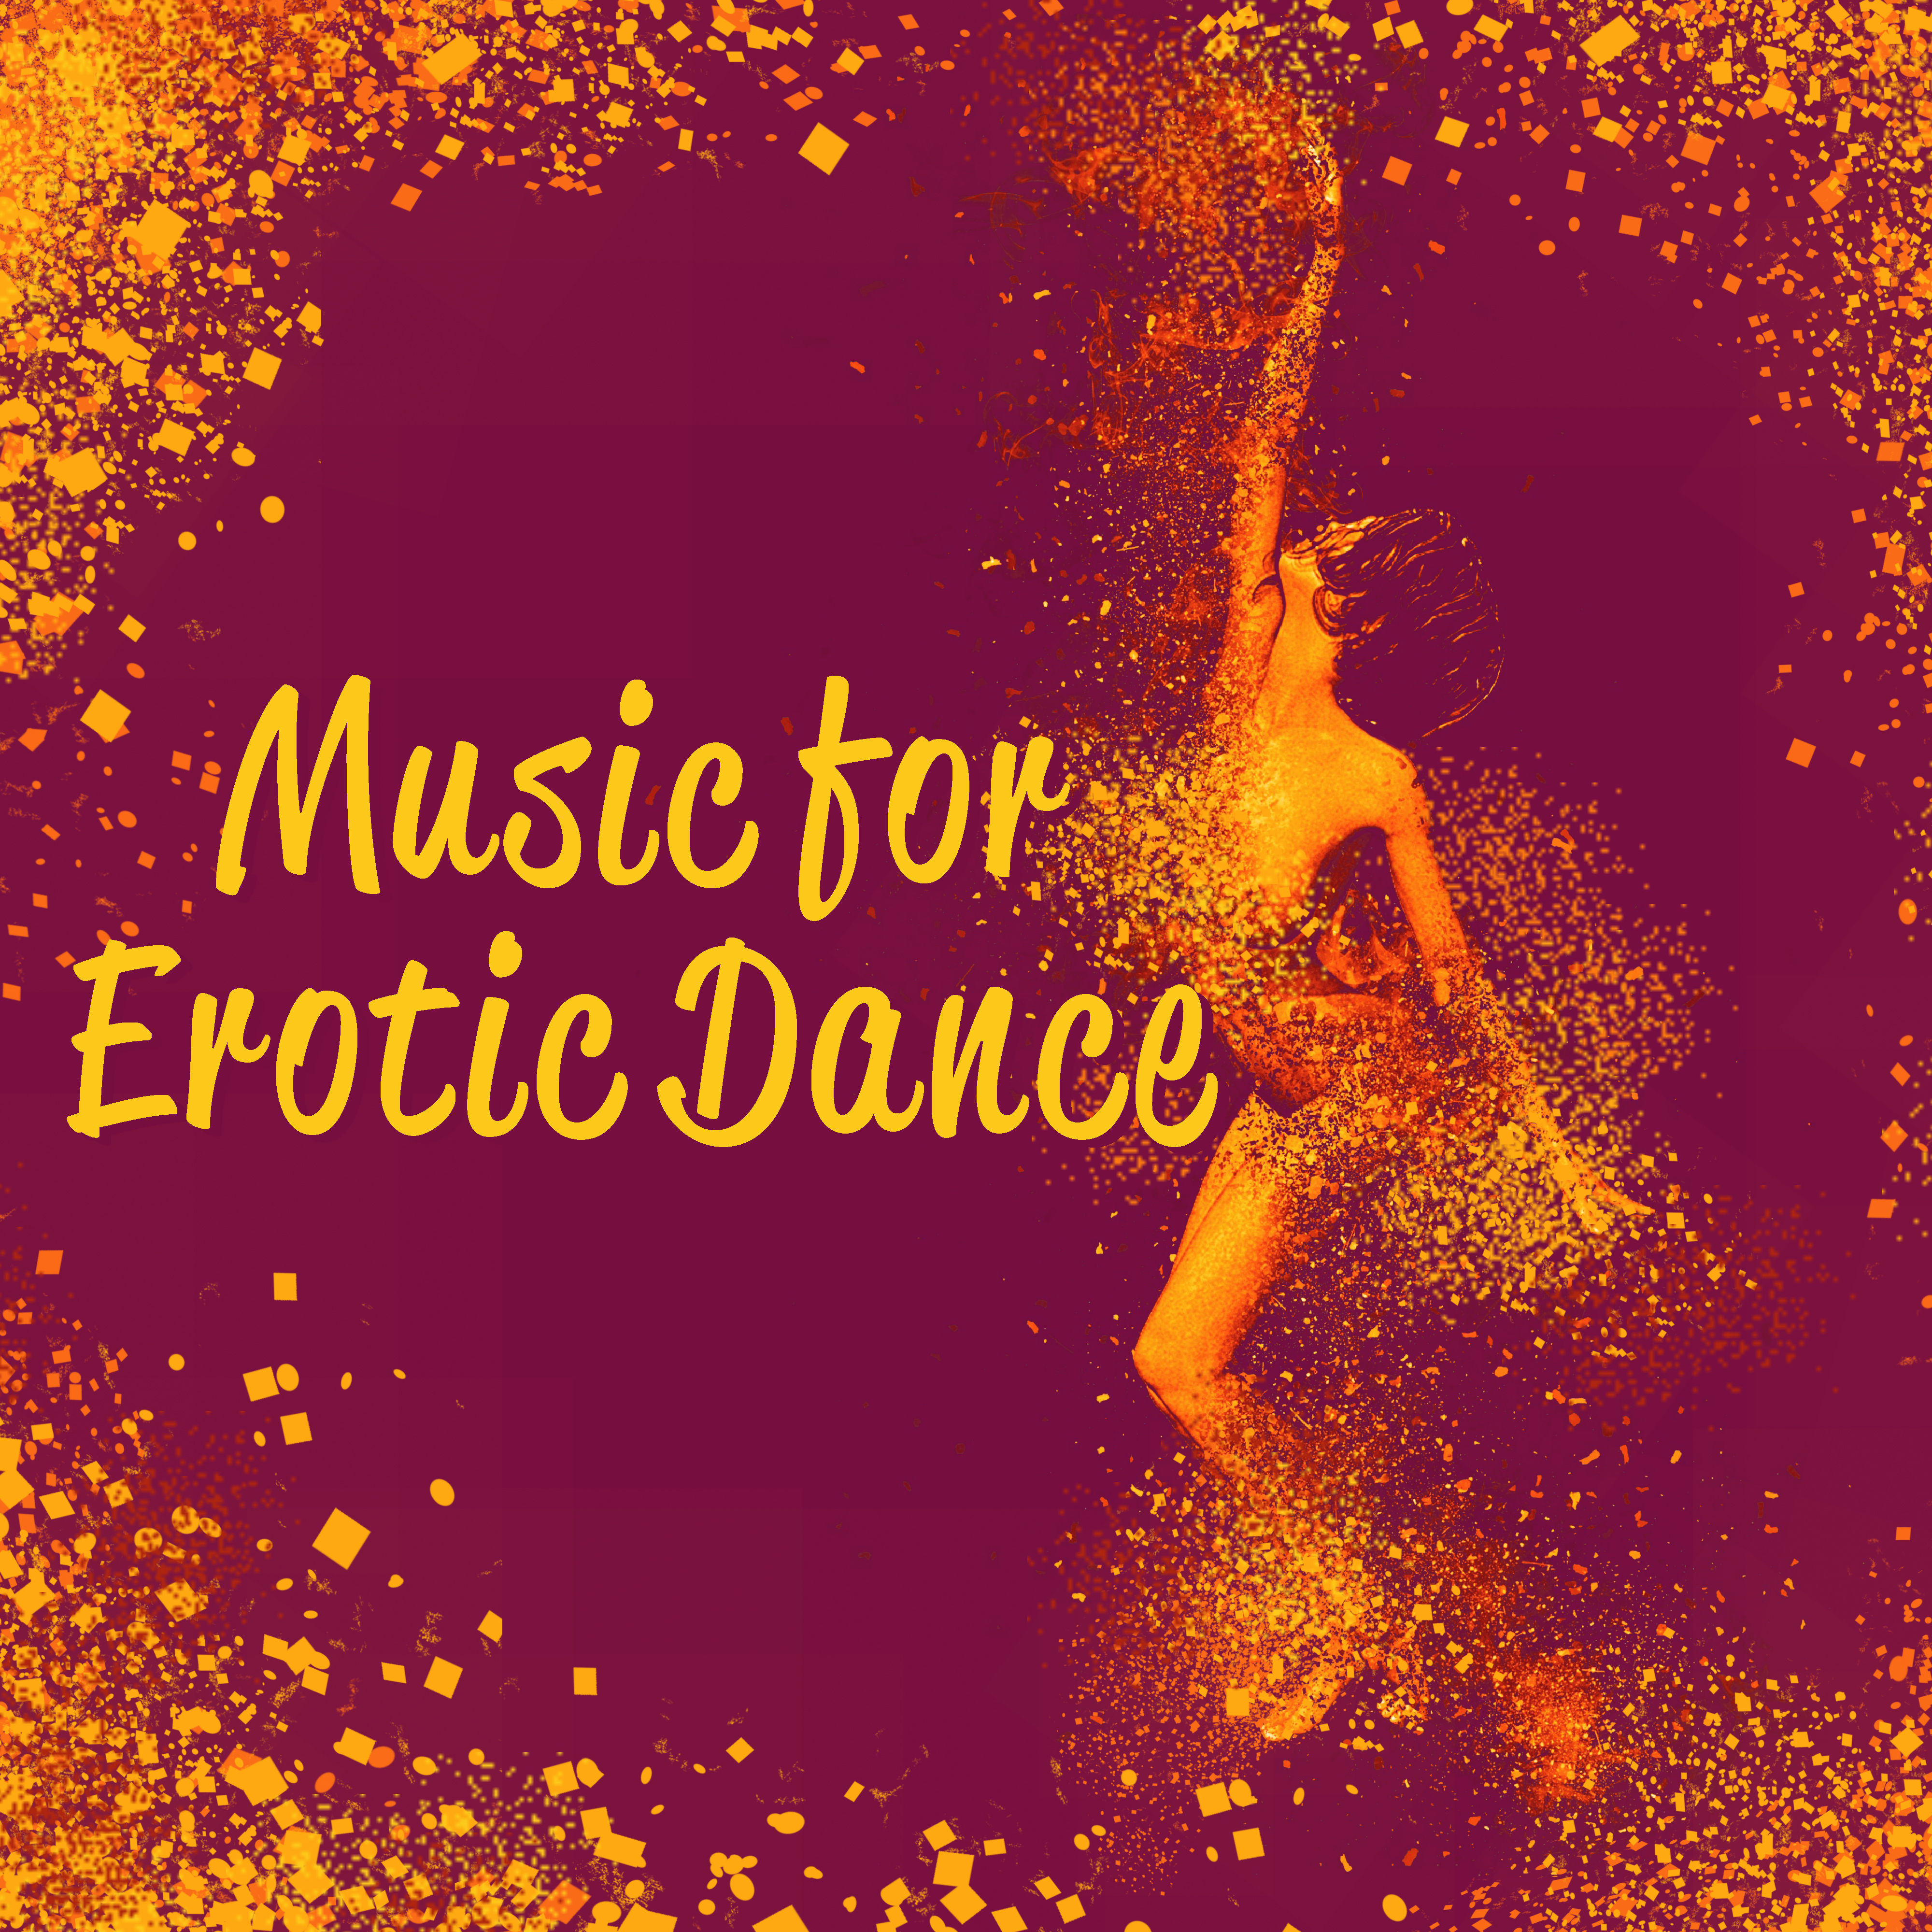 Music for Erotic Dance – Ibiza Summertime, Hot Chill Out Music, **** Vibes, Erotic Lounge, Relax, Summer Hits, Holiday Time